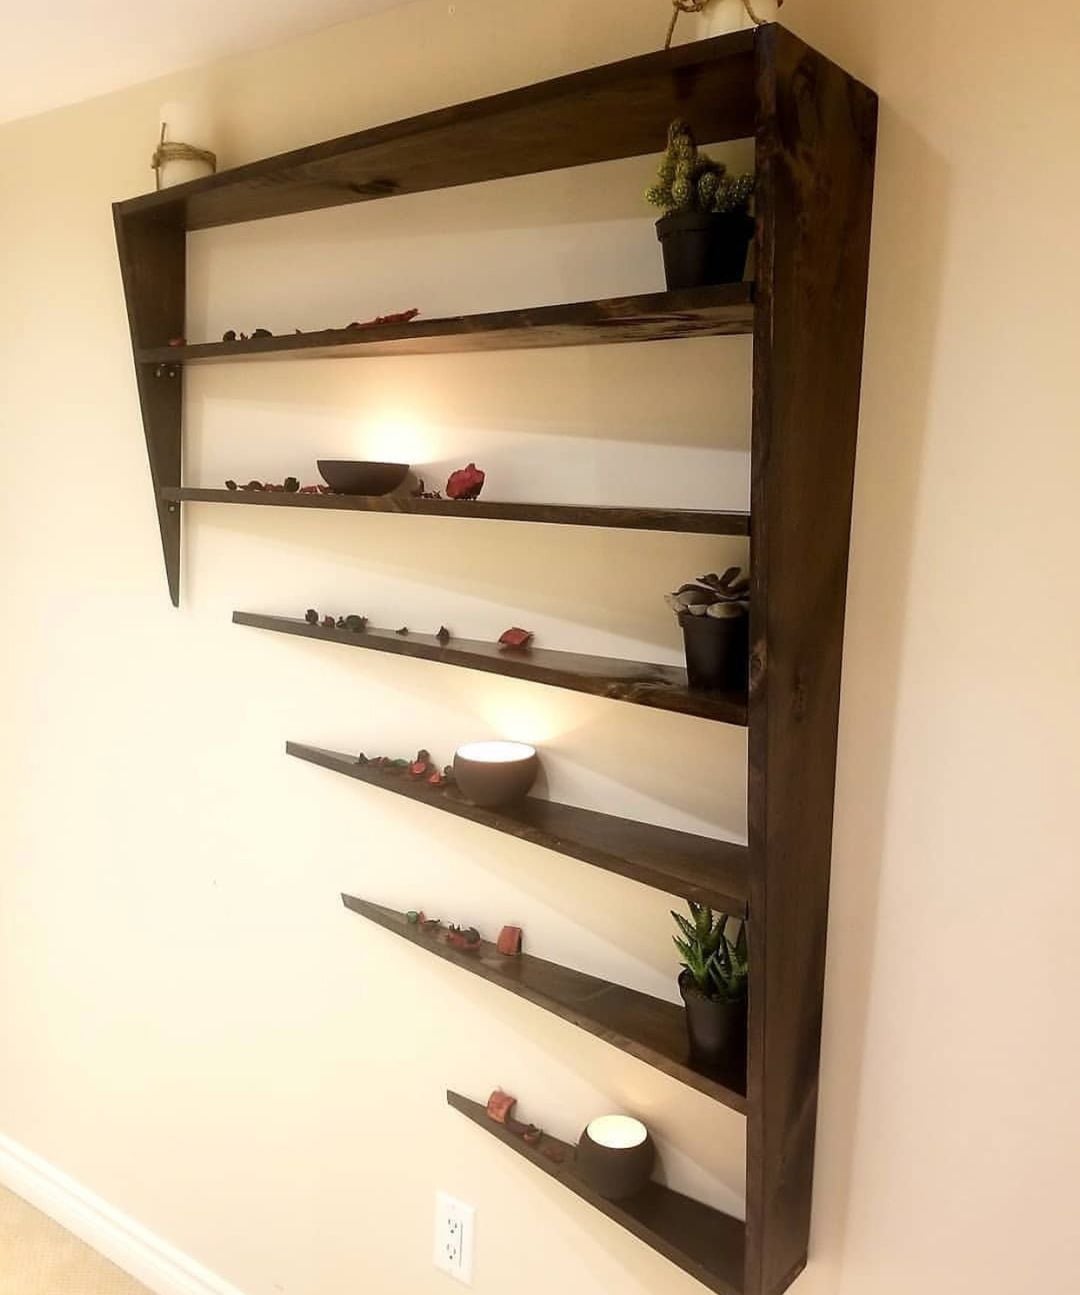 A Bookshelf To Store Some Pebbles Or Something